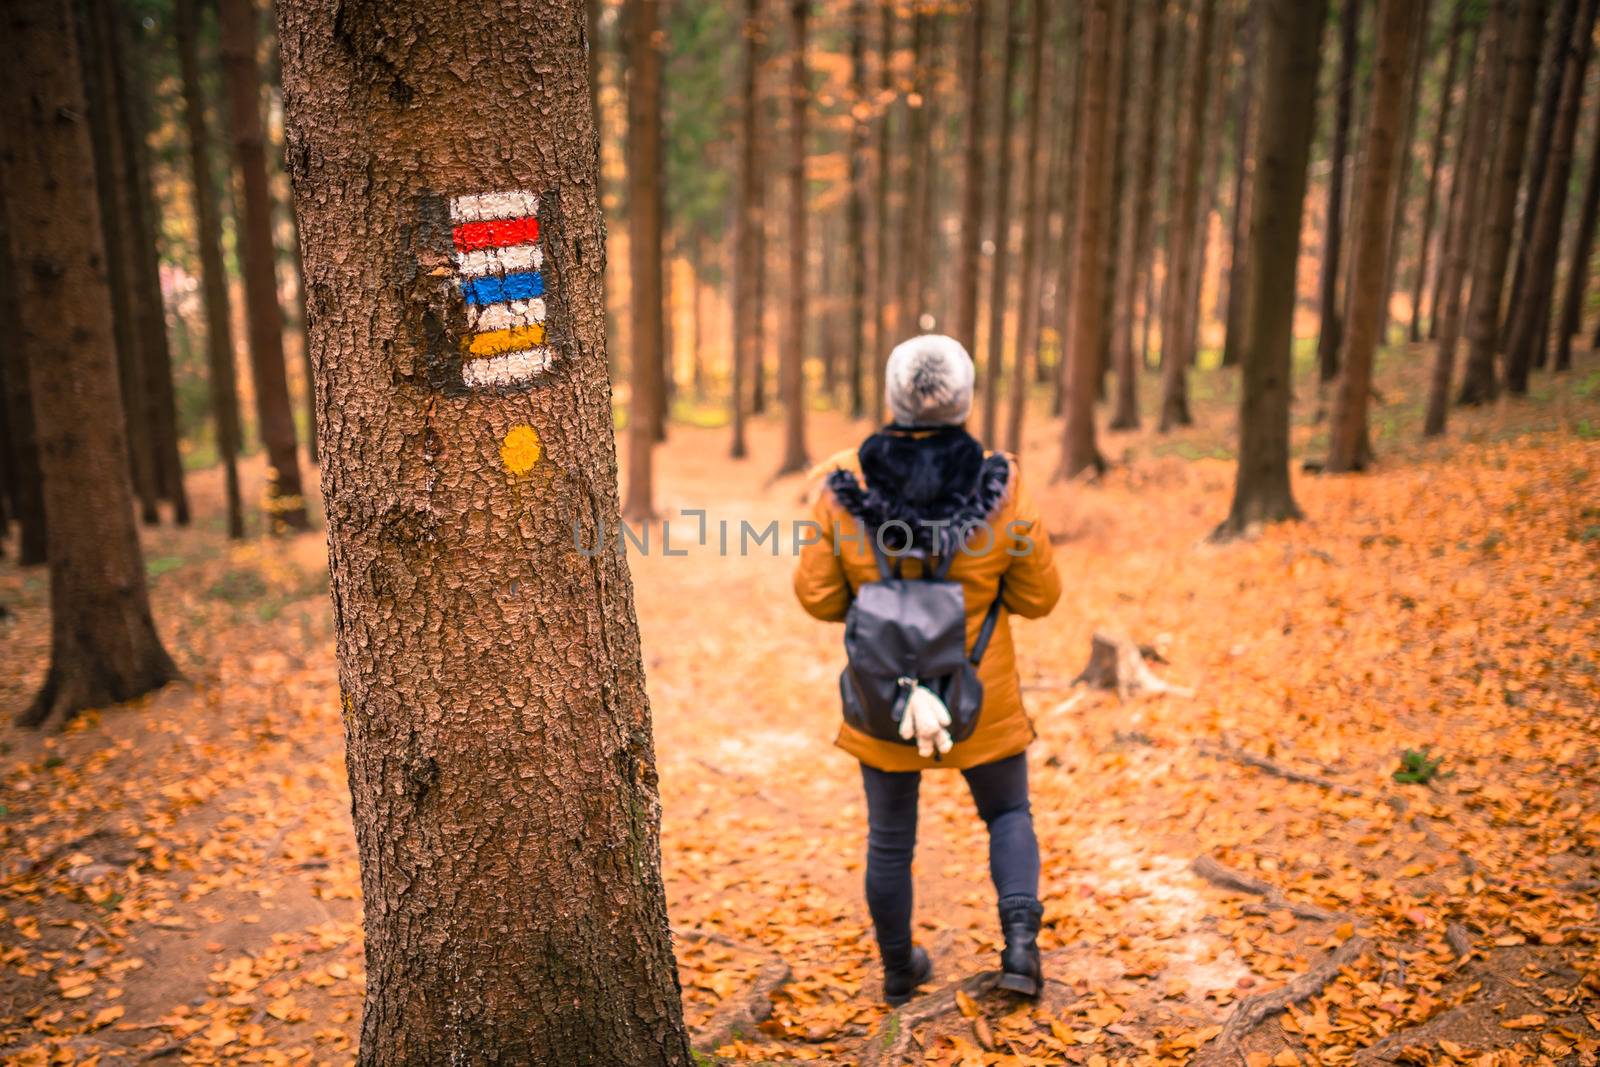 Touristic sign ormark on tree next to touristic path with female tourist in background. Nice autumn scene.